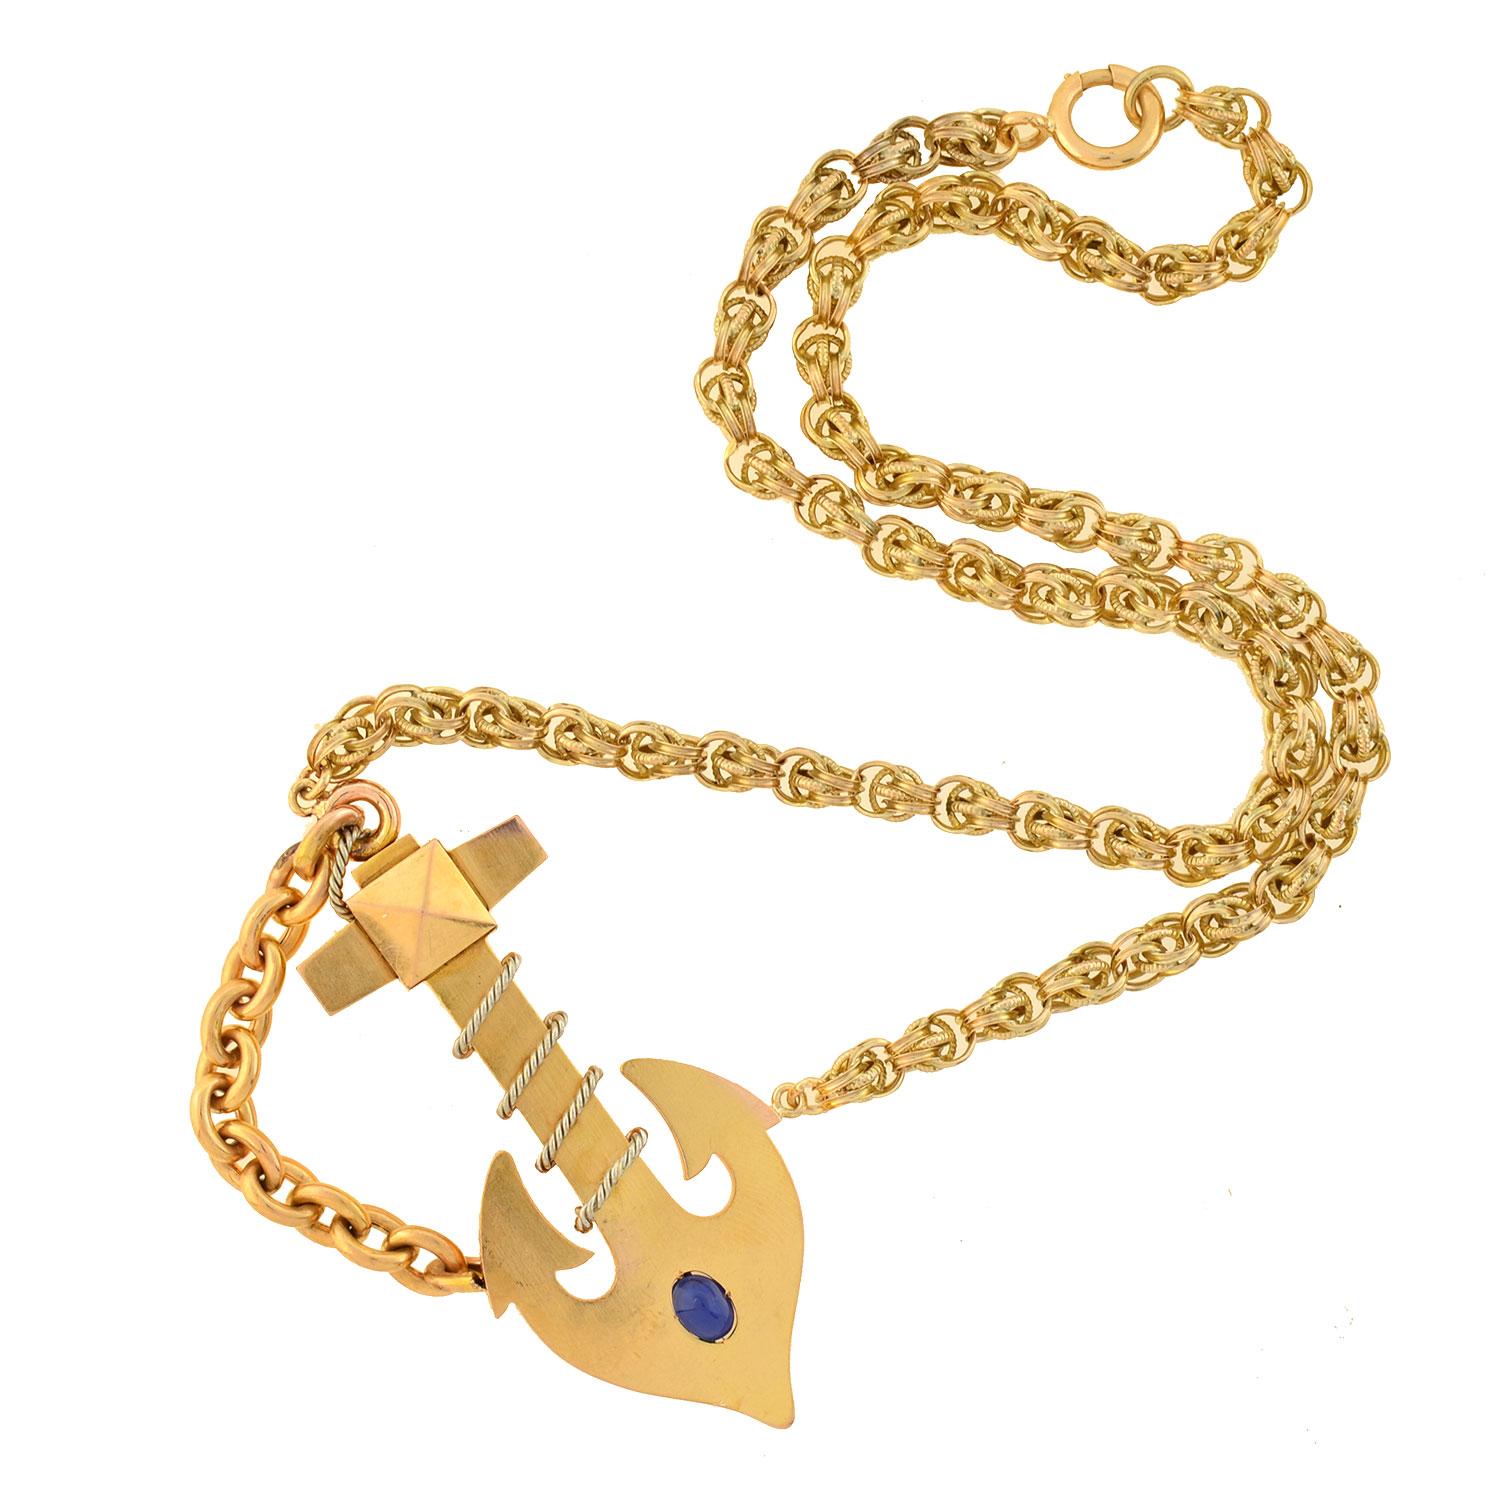 A fabulous anchor pendant necklace from the Victorian (ca1880) era! This beautiful piece is comprised of a bold anchor pendant, which is crafted in 18kt rosy yellow gold and attaches to a fine wirework chain. The anchor, which is particularly large